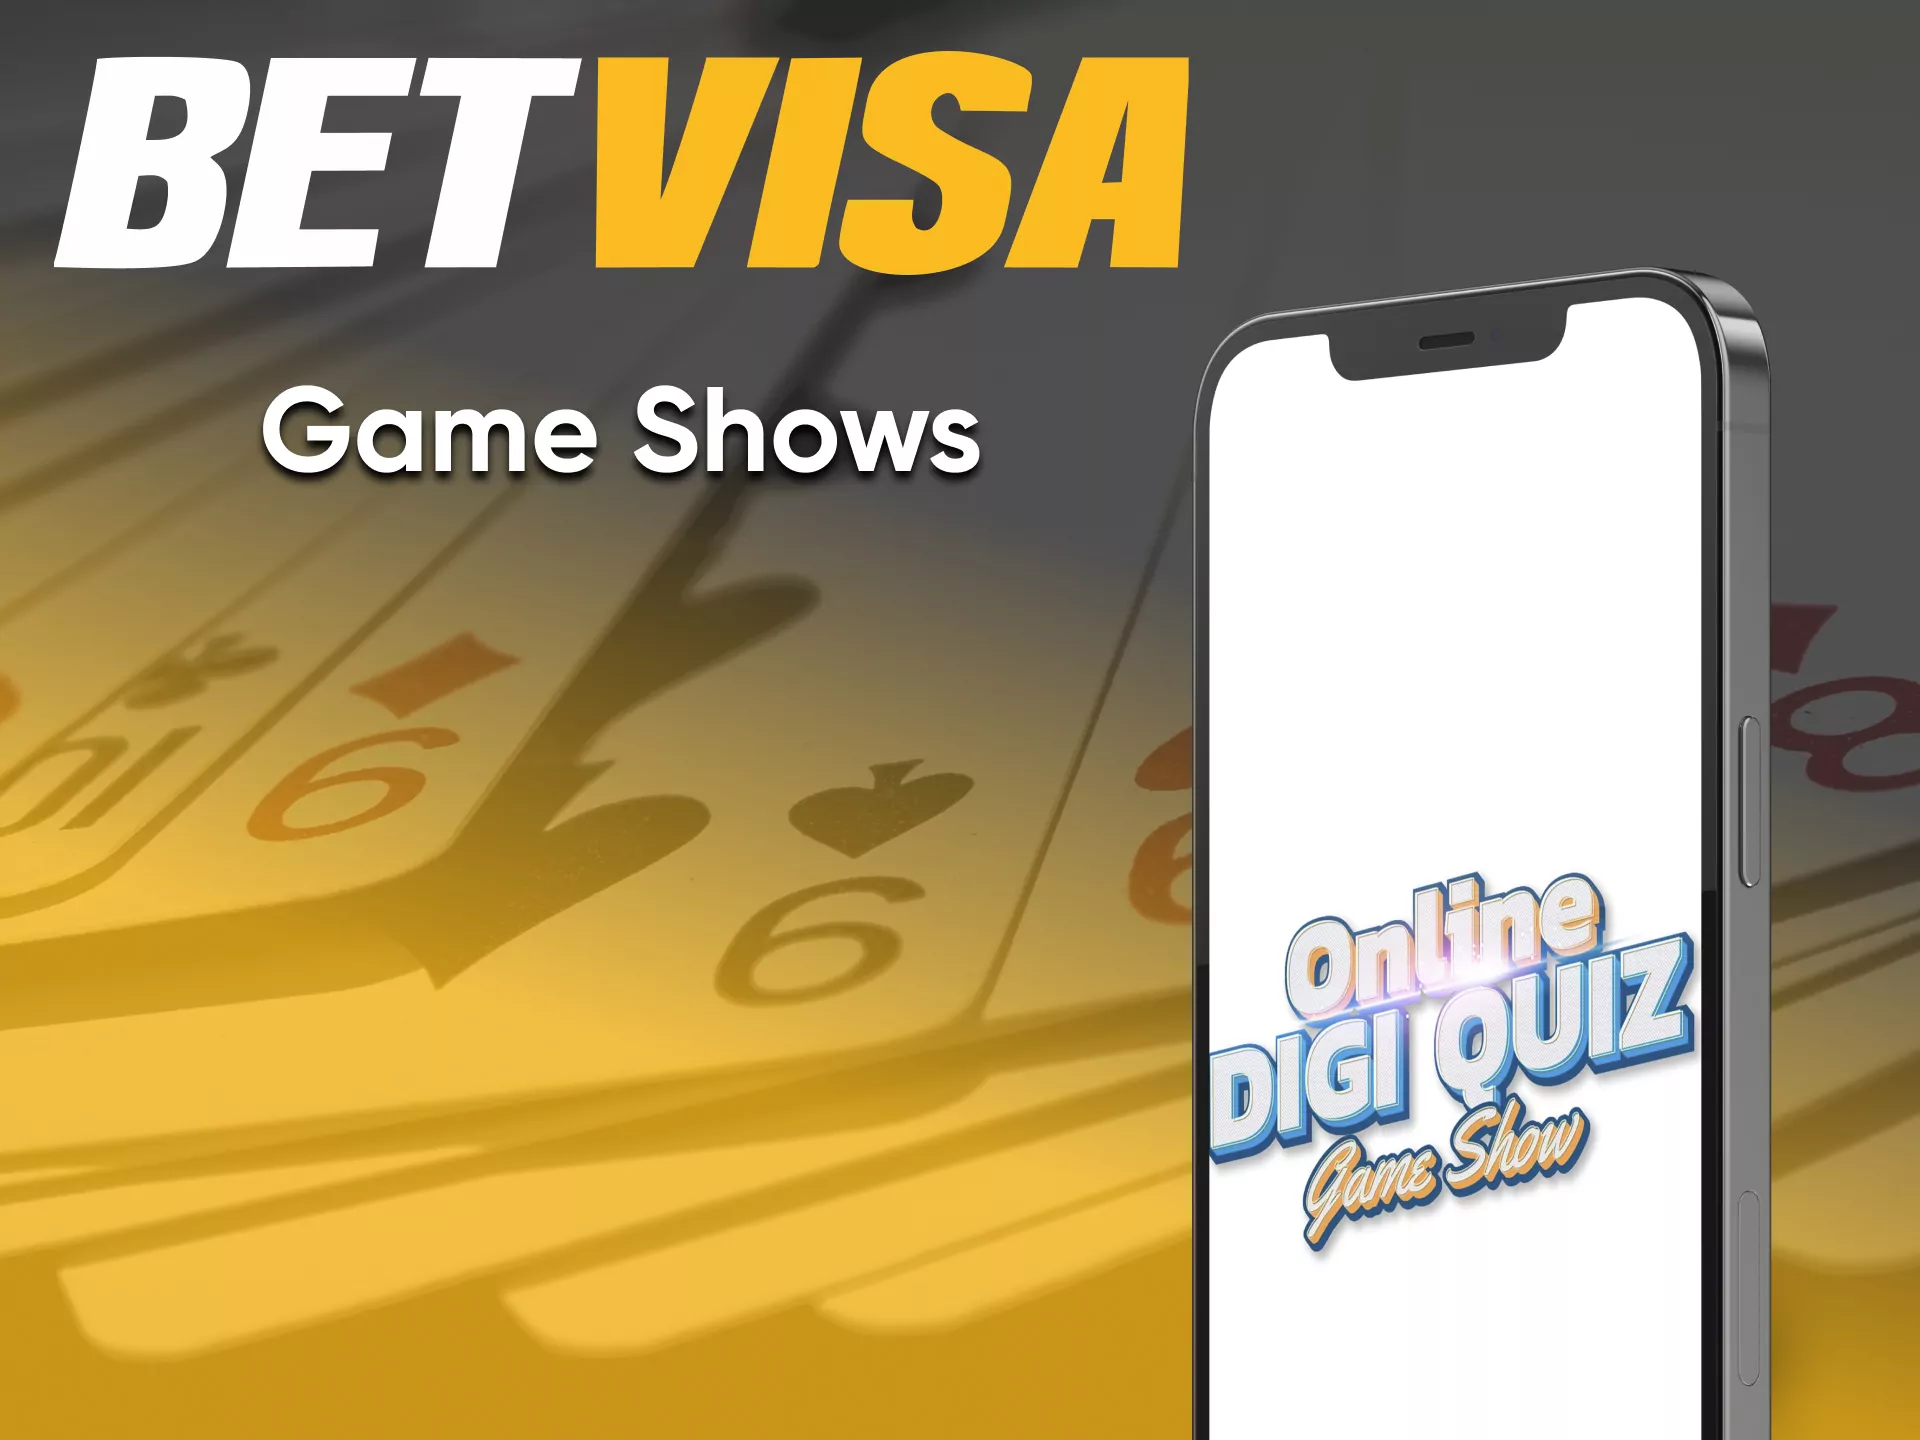 You can play TV games in the BetVisa app.